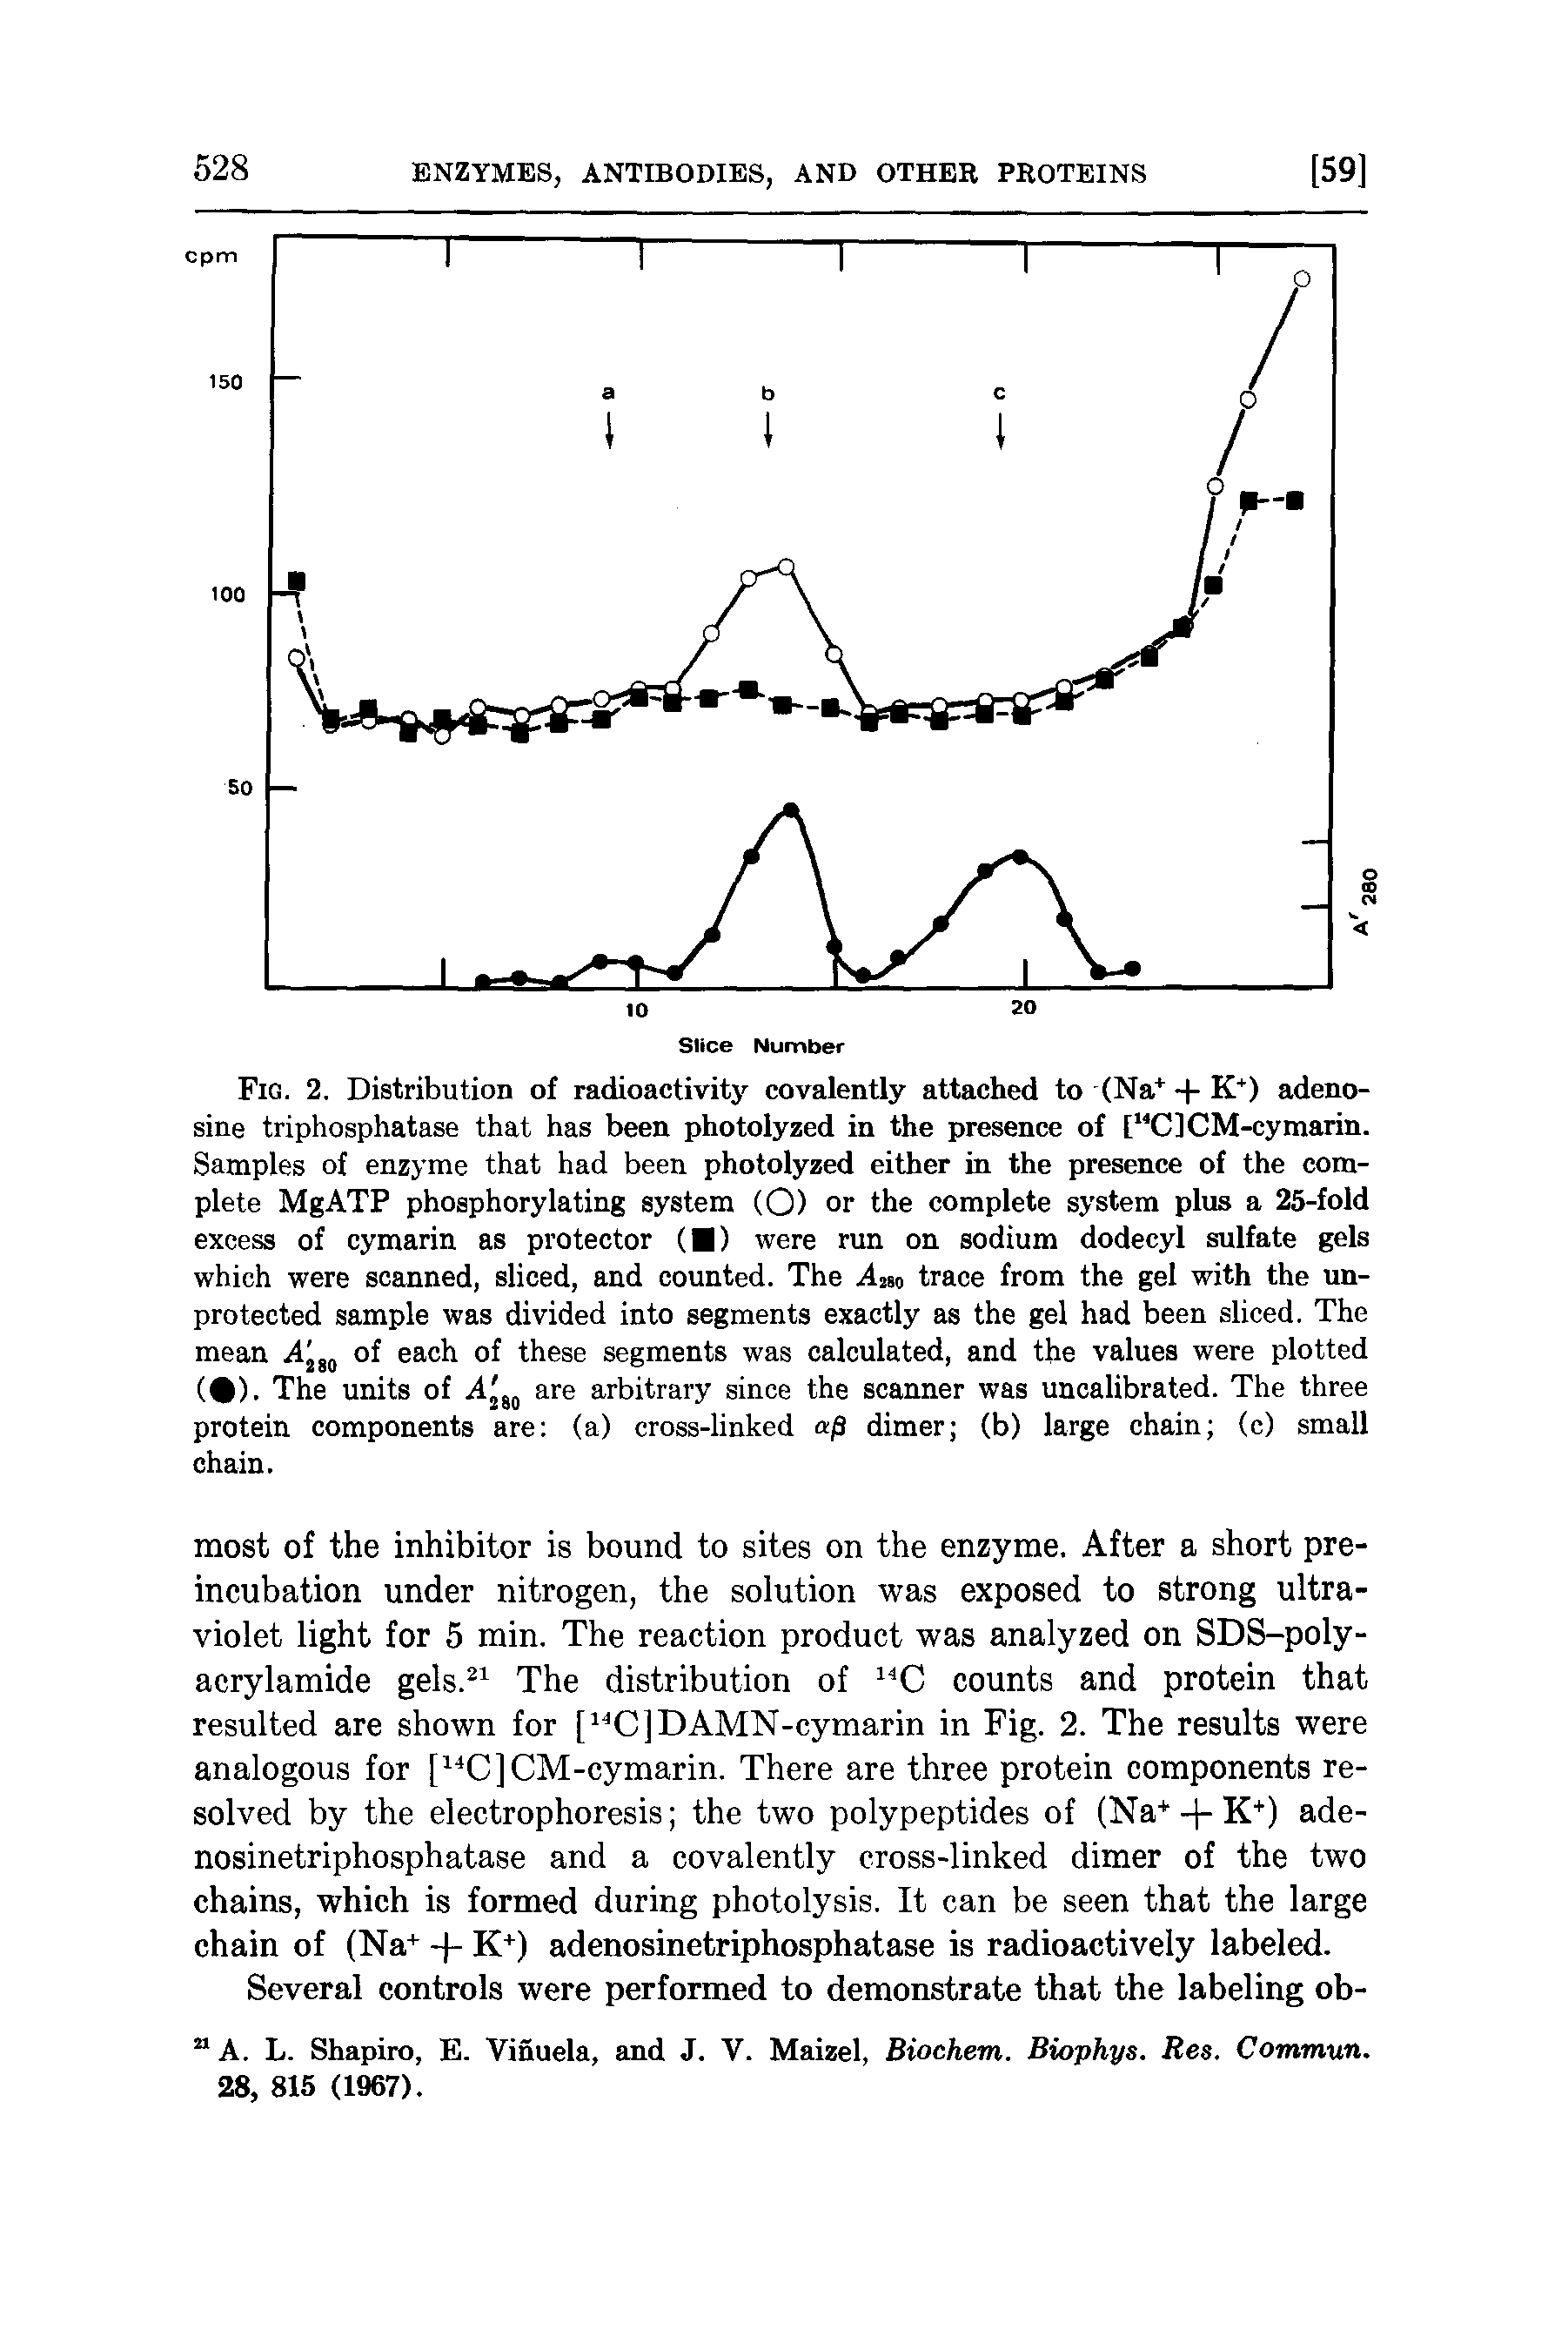 Fig. 2. Distribution of radioactivity covalently attached to (Na + K ) adenosine triphosphatase that has been photolyzed in the presence of [ ClCM-cymarin. Samples of enzyme that had been photolyzed either in the presence of the complete MgATP phosphorylating system (O) or the complete system plus a 25-fold excess of cymarin as protector ( ) were run on sodium dodecyl sulfate gels which were scanned, sliced, and counted. The A2M trace from the gel with the unprotected sample was divided into segments exactly as the gel had been sliced. The mean of each of these segments was calculated, and the values were plotted ( ). The units of are arbitrary since the scanner was uncalibrated. The three protein components are (a) cross-linked /3 dimer (b) large chain (c) small chain.